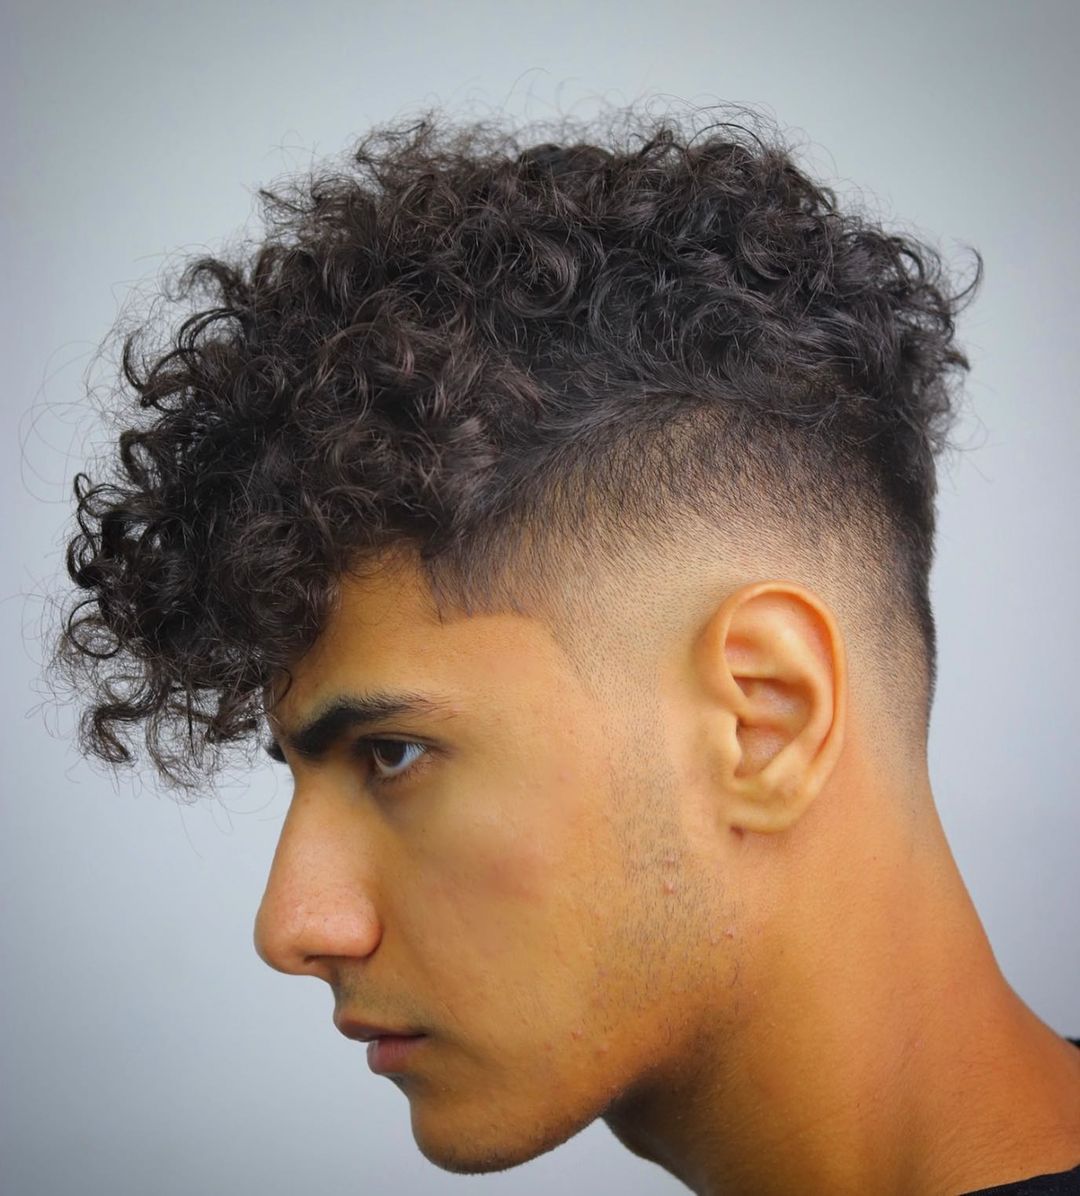 perm hairstyle for men 356 Asian male perm Hairstyles | Best perm hairstyles | perm hairstyles Perm hairstyles for Men